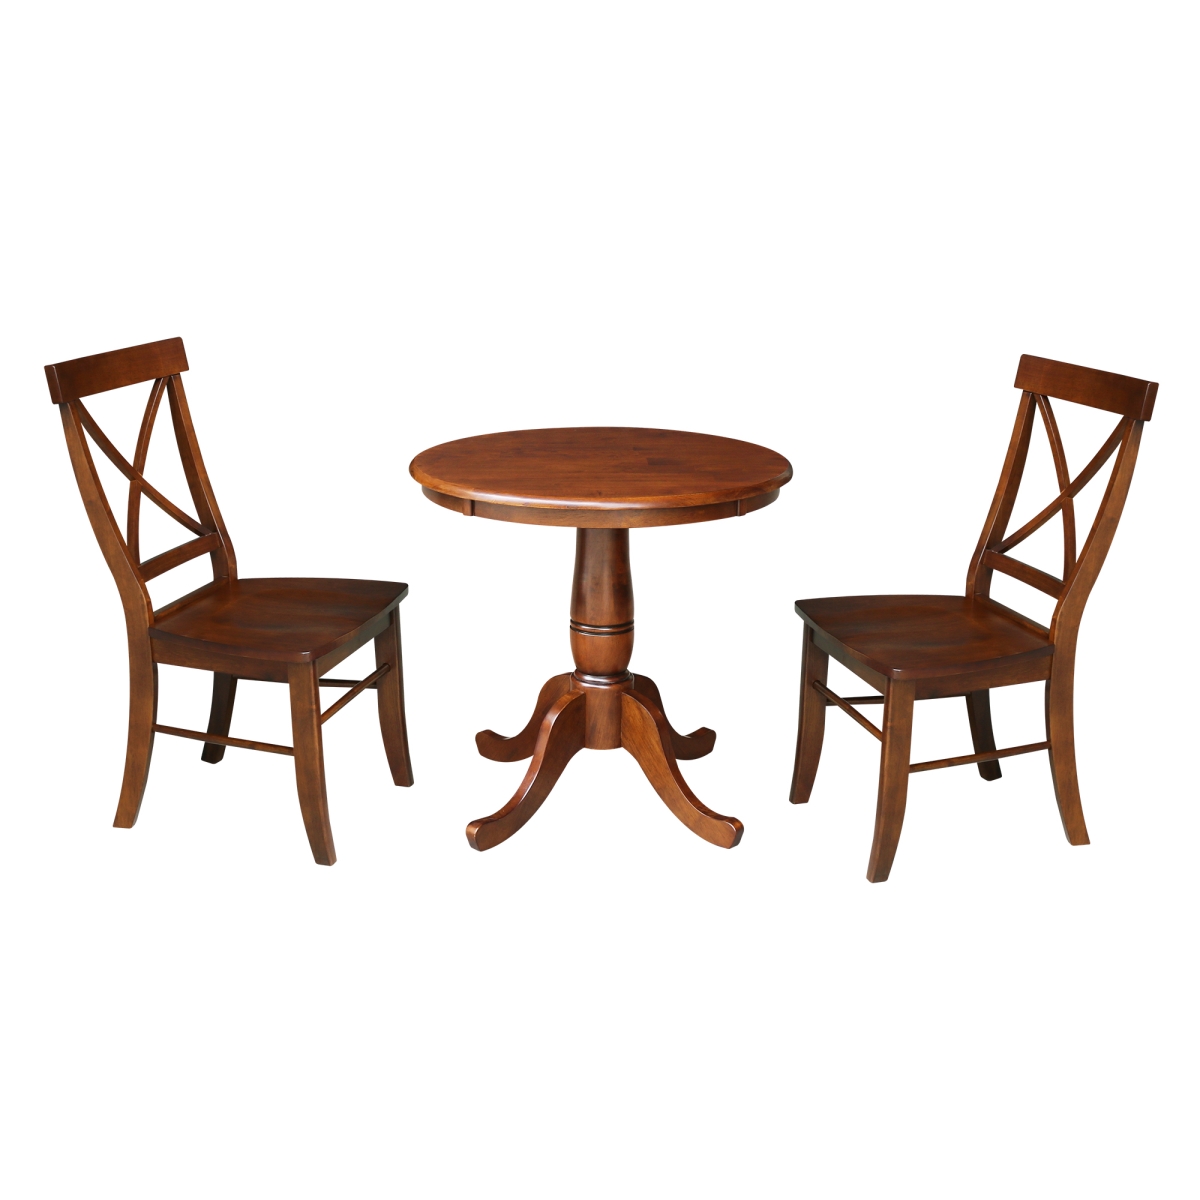 K581-30rt-c613-2 30 In. Round Top Pedestal Table With 2 Chairs, Espresso - 3 Piece